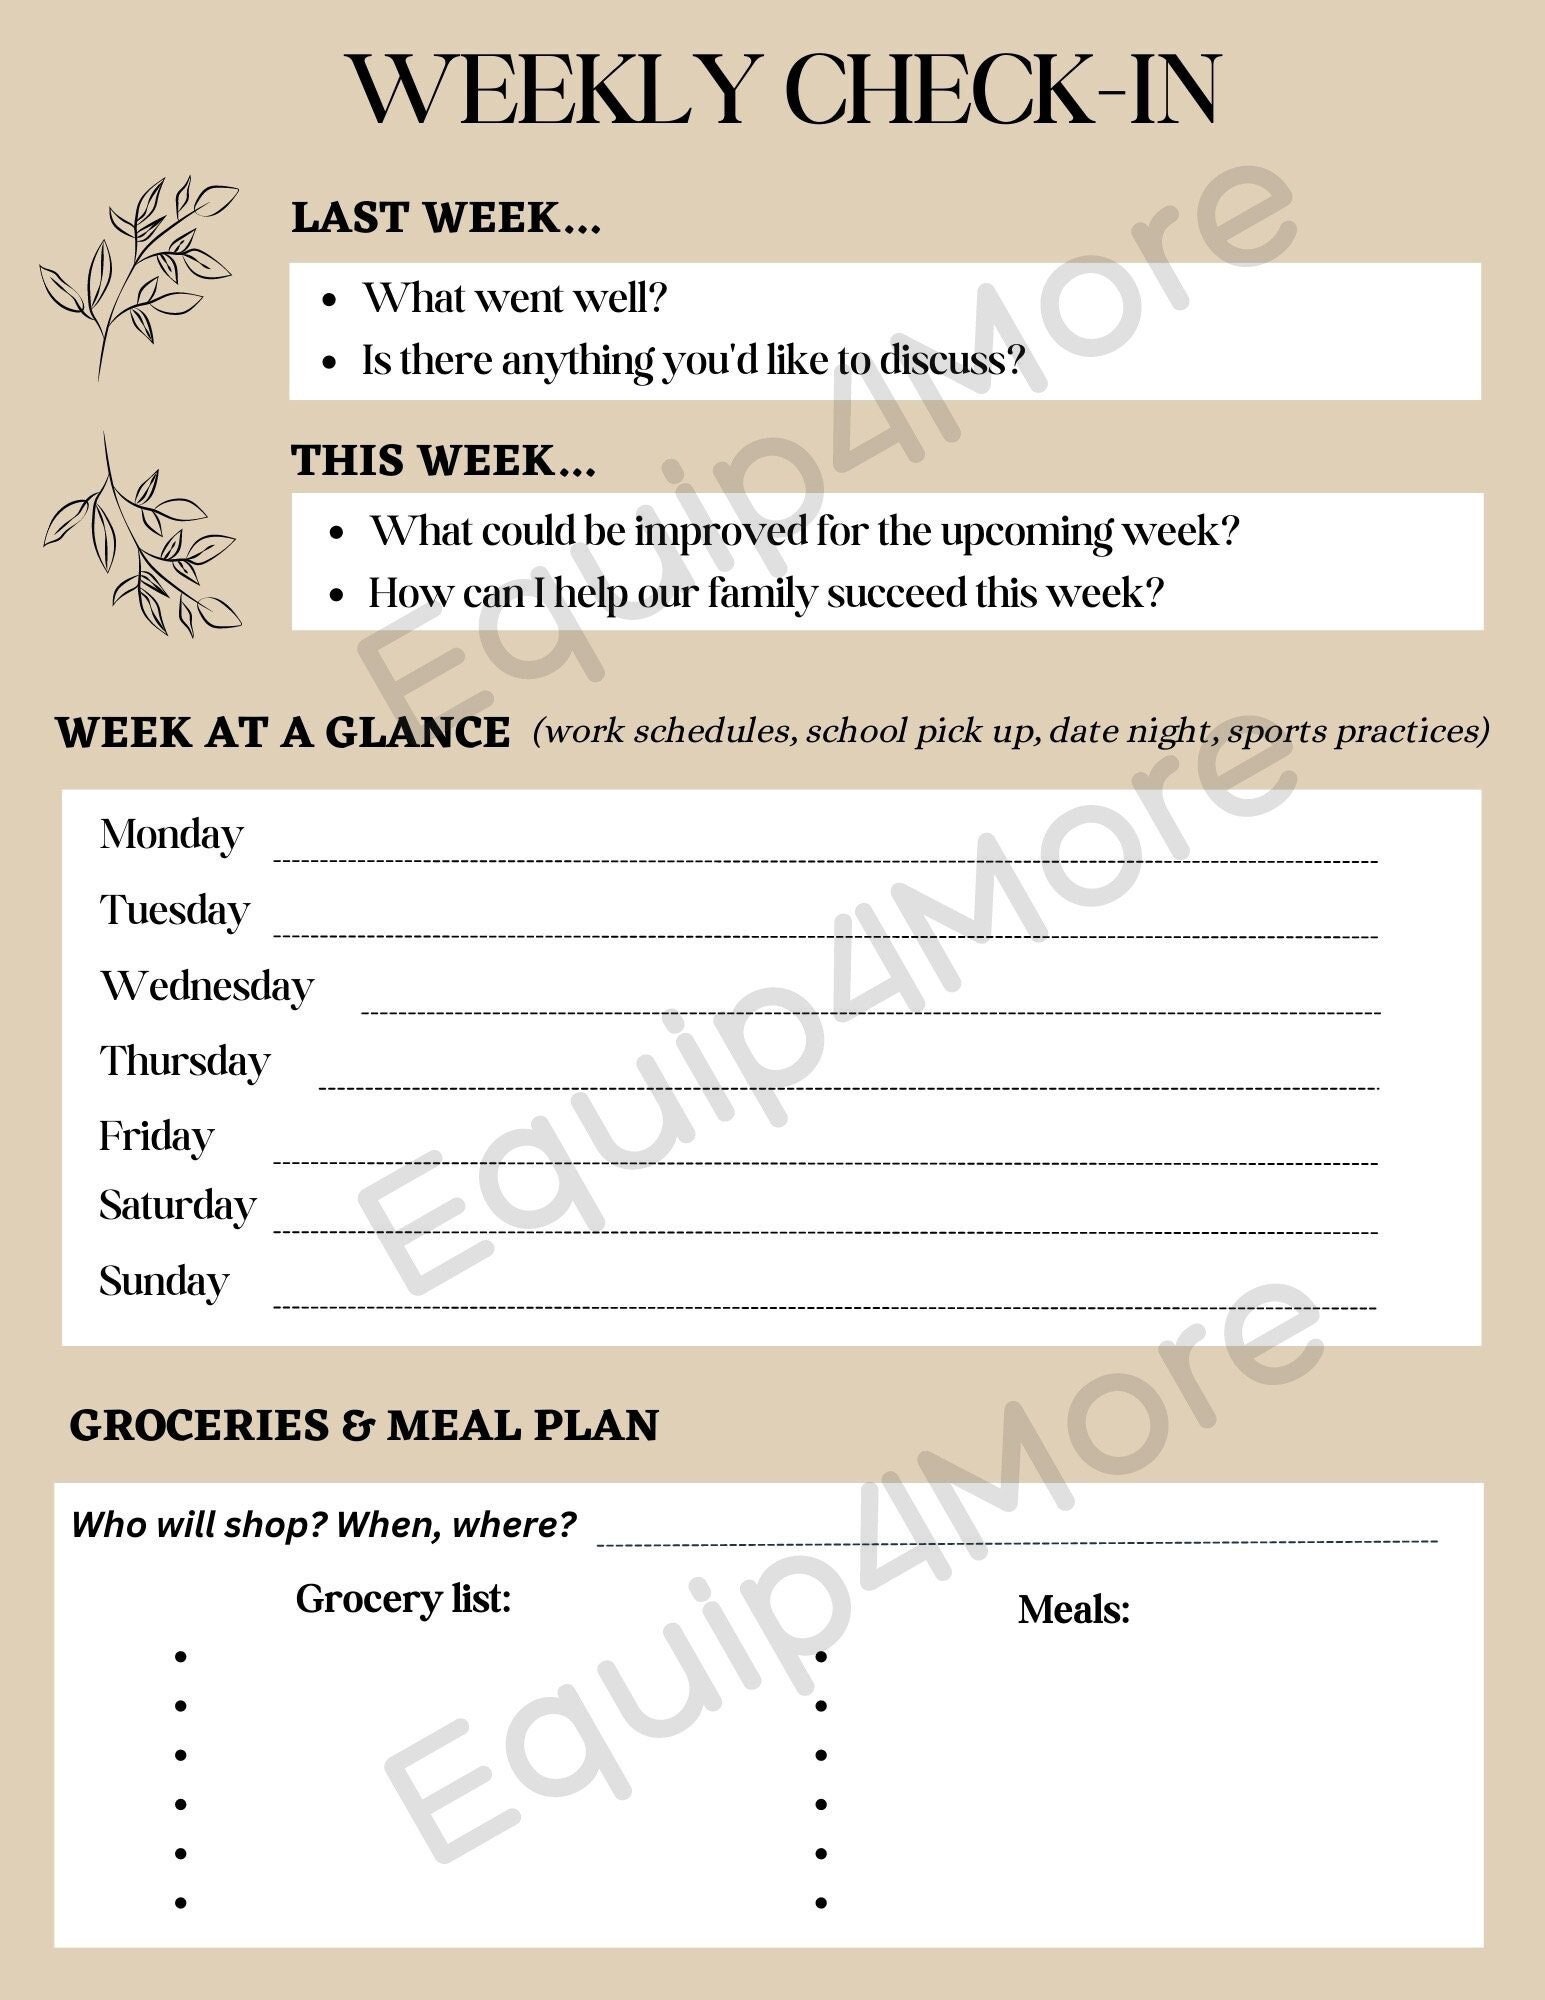 marriage-weekly-check-in-template-instant-download-etsy